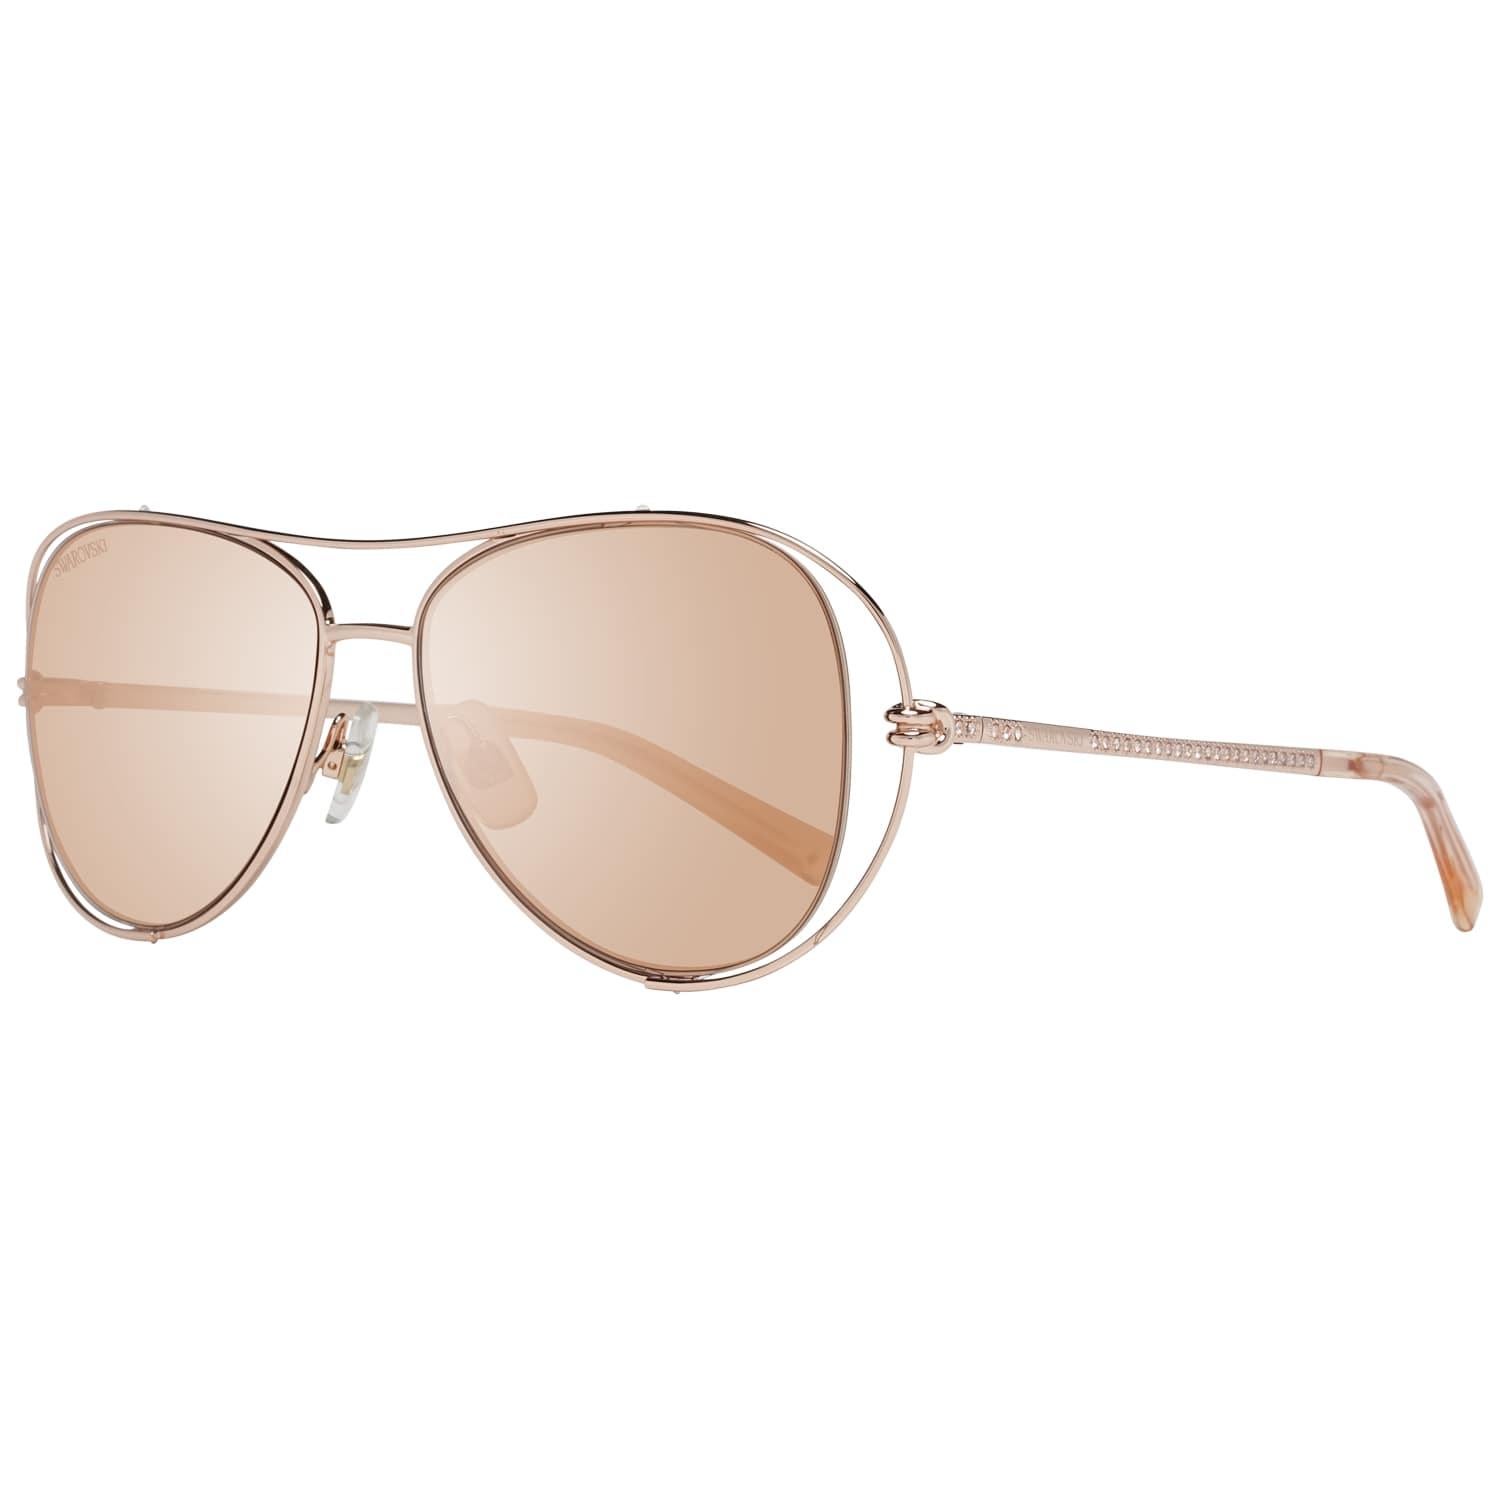 DetailsMATERIAL: MetalCOLOR: Rose GoldMODEL: SK0231 5528GGENDER: WomenCOUNTRY OF MANUFACTURE: ChinaTYPE: SunglassesORIGINAL CASE?: YesSTYLE: AviatorOCCASION: CasualFEATURES: LightweightLENS COLOR: BronzeLENS TECHNOLOGY: MirroredYEAR MANUFACTURED: